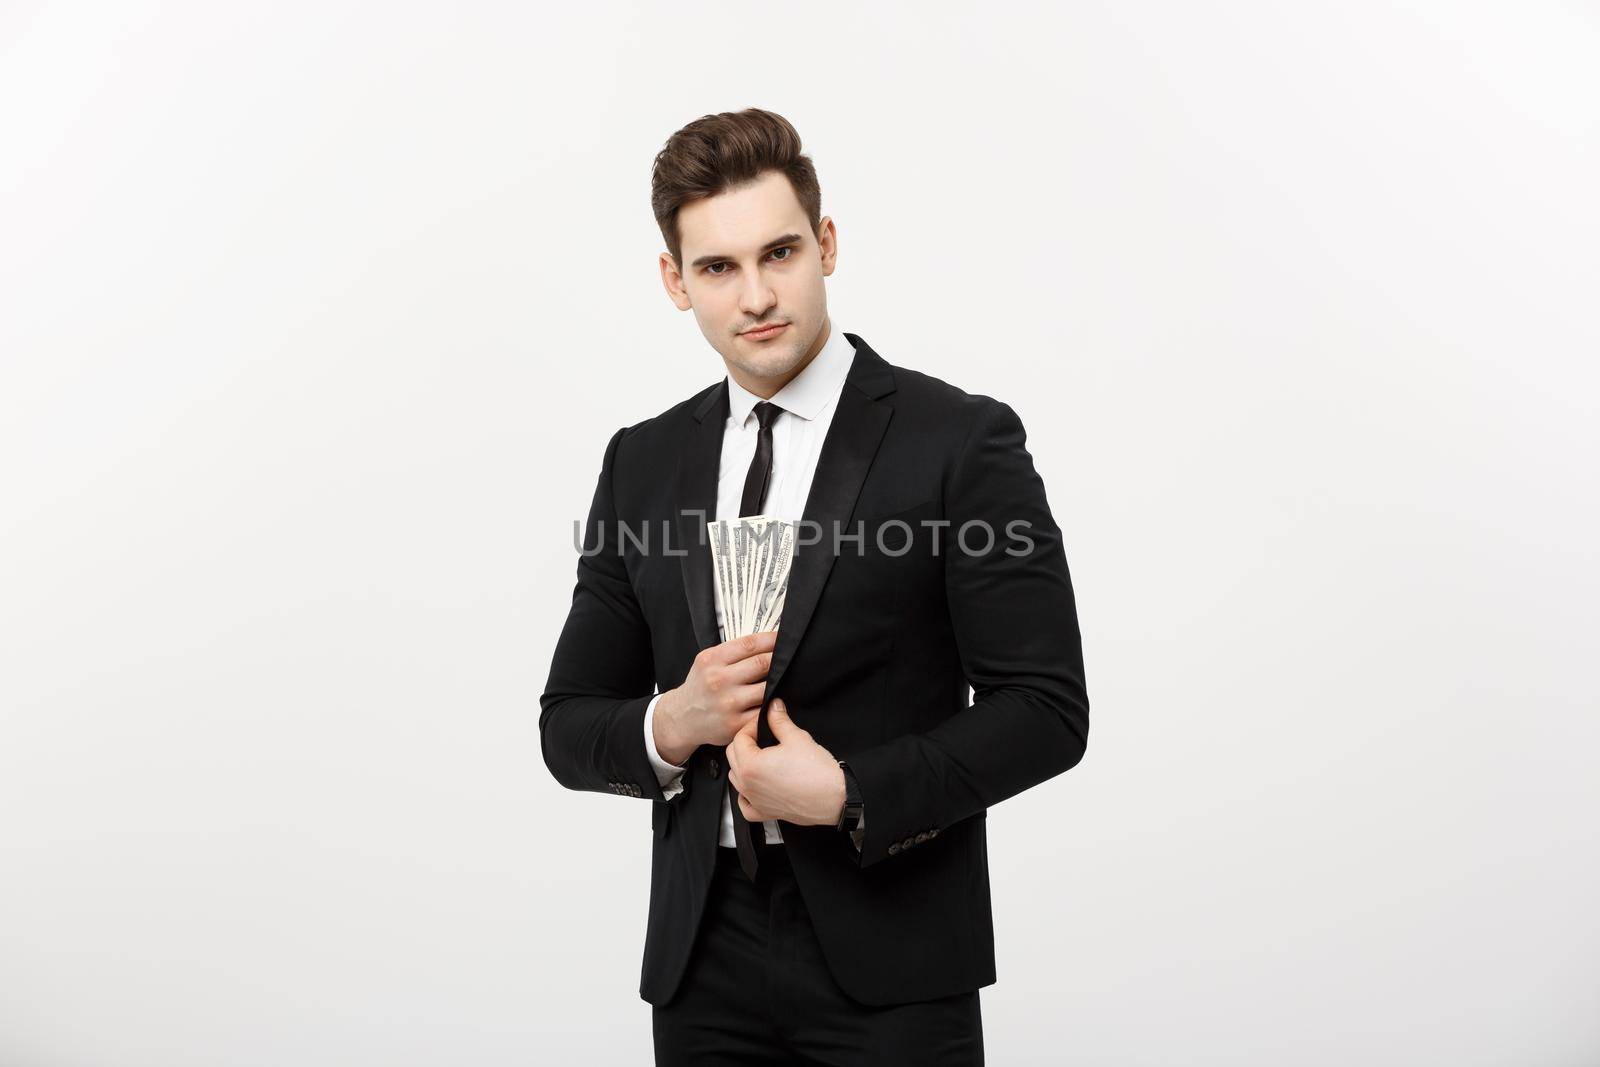 Business Concept: Handsome businessman in black suit taking dollars banknotes with stealthy expression against white background